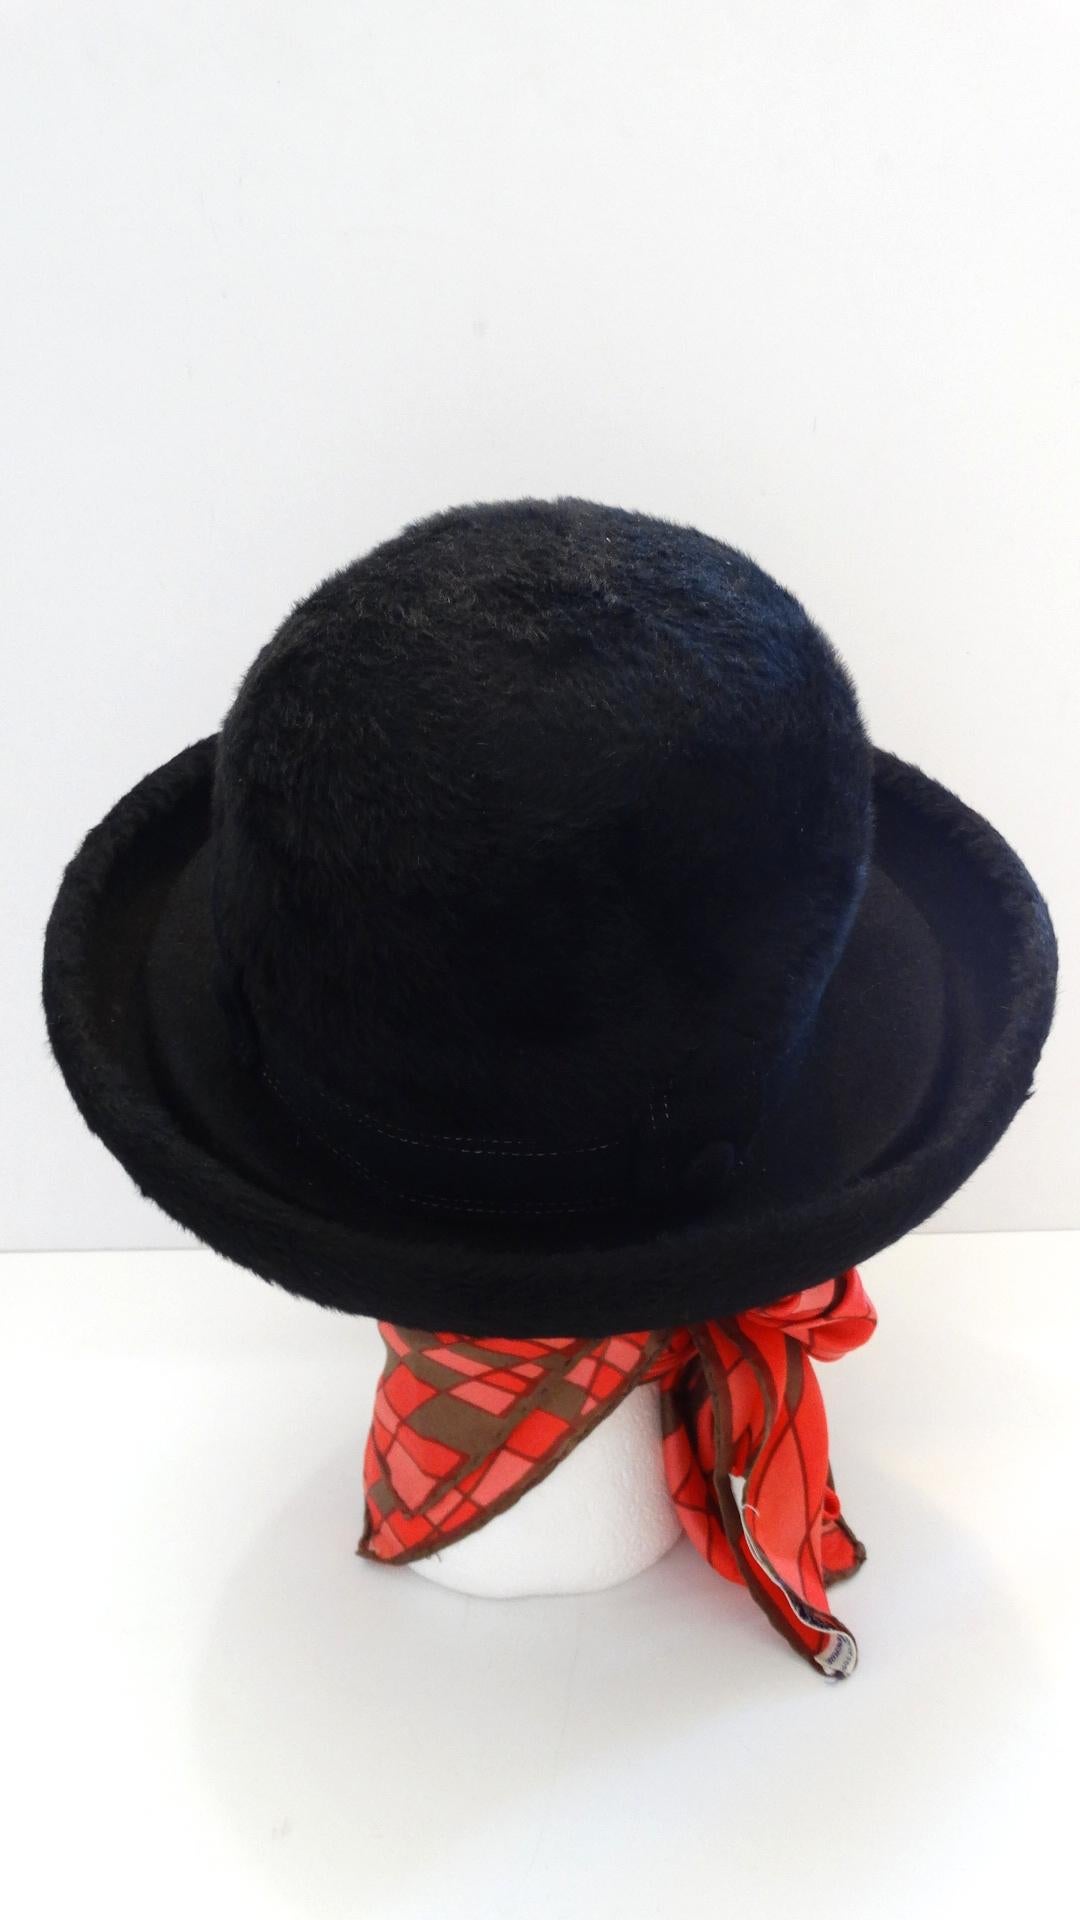 The Perfect Winter Hat Has Arrived! Circa 1960s, this Dior derby style hat features a porkpie brim. The crown of the hat and the outer trim of the brim  are made of black faux fur. The inner brim is black wool felt. The crown features a band with